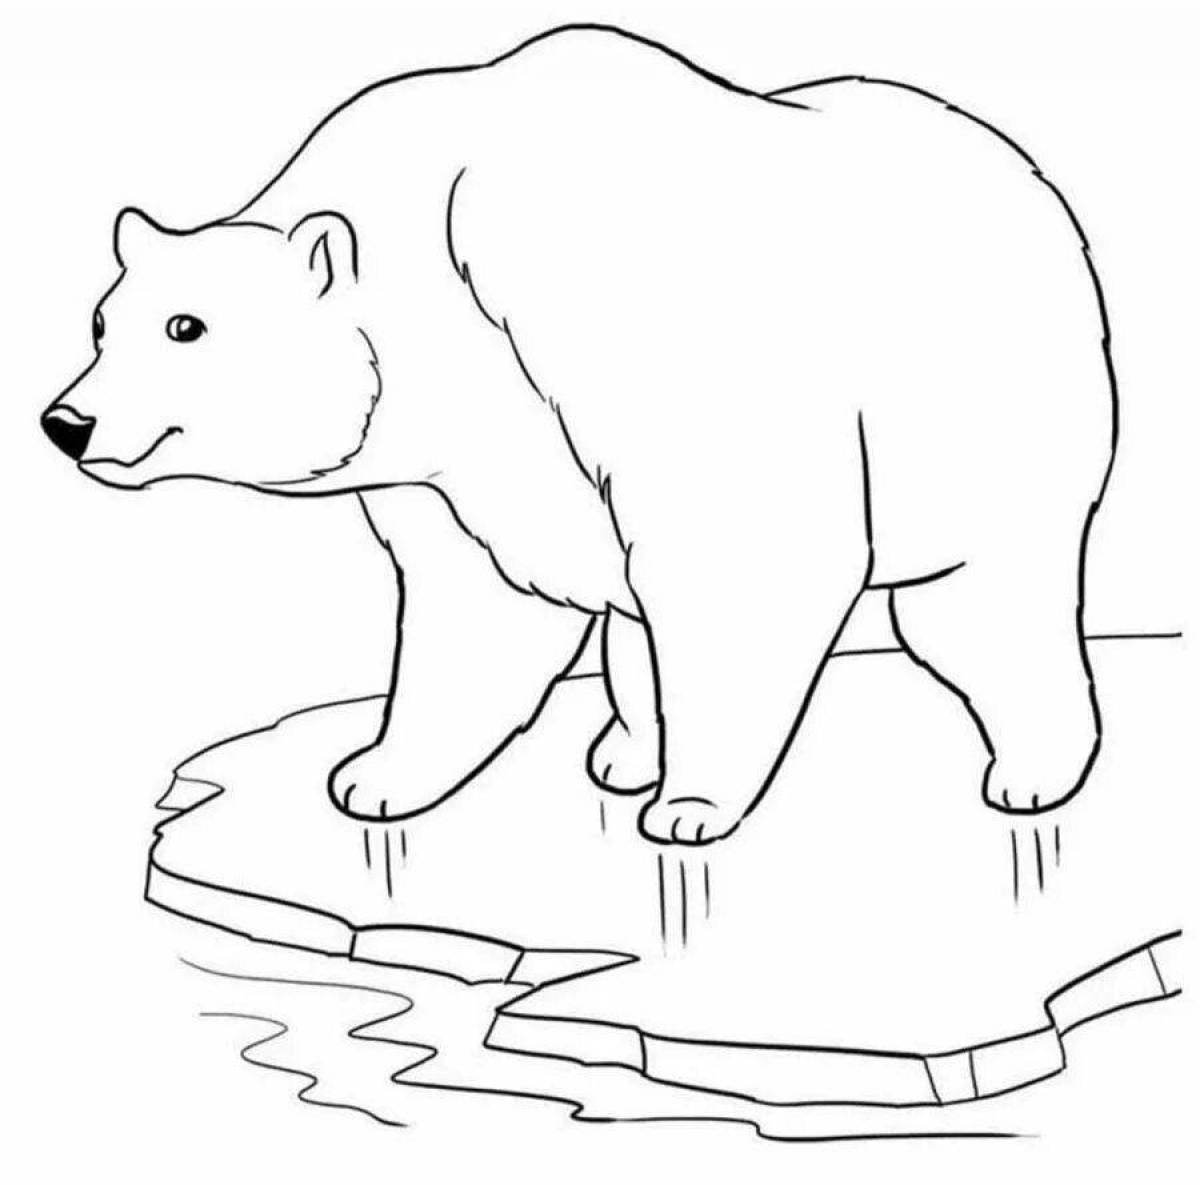 Coloring book sparkling bear in the north